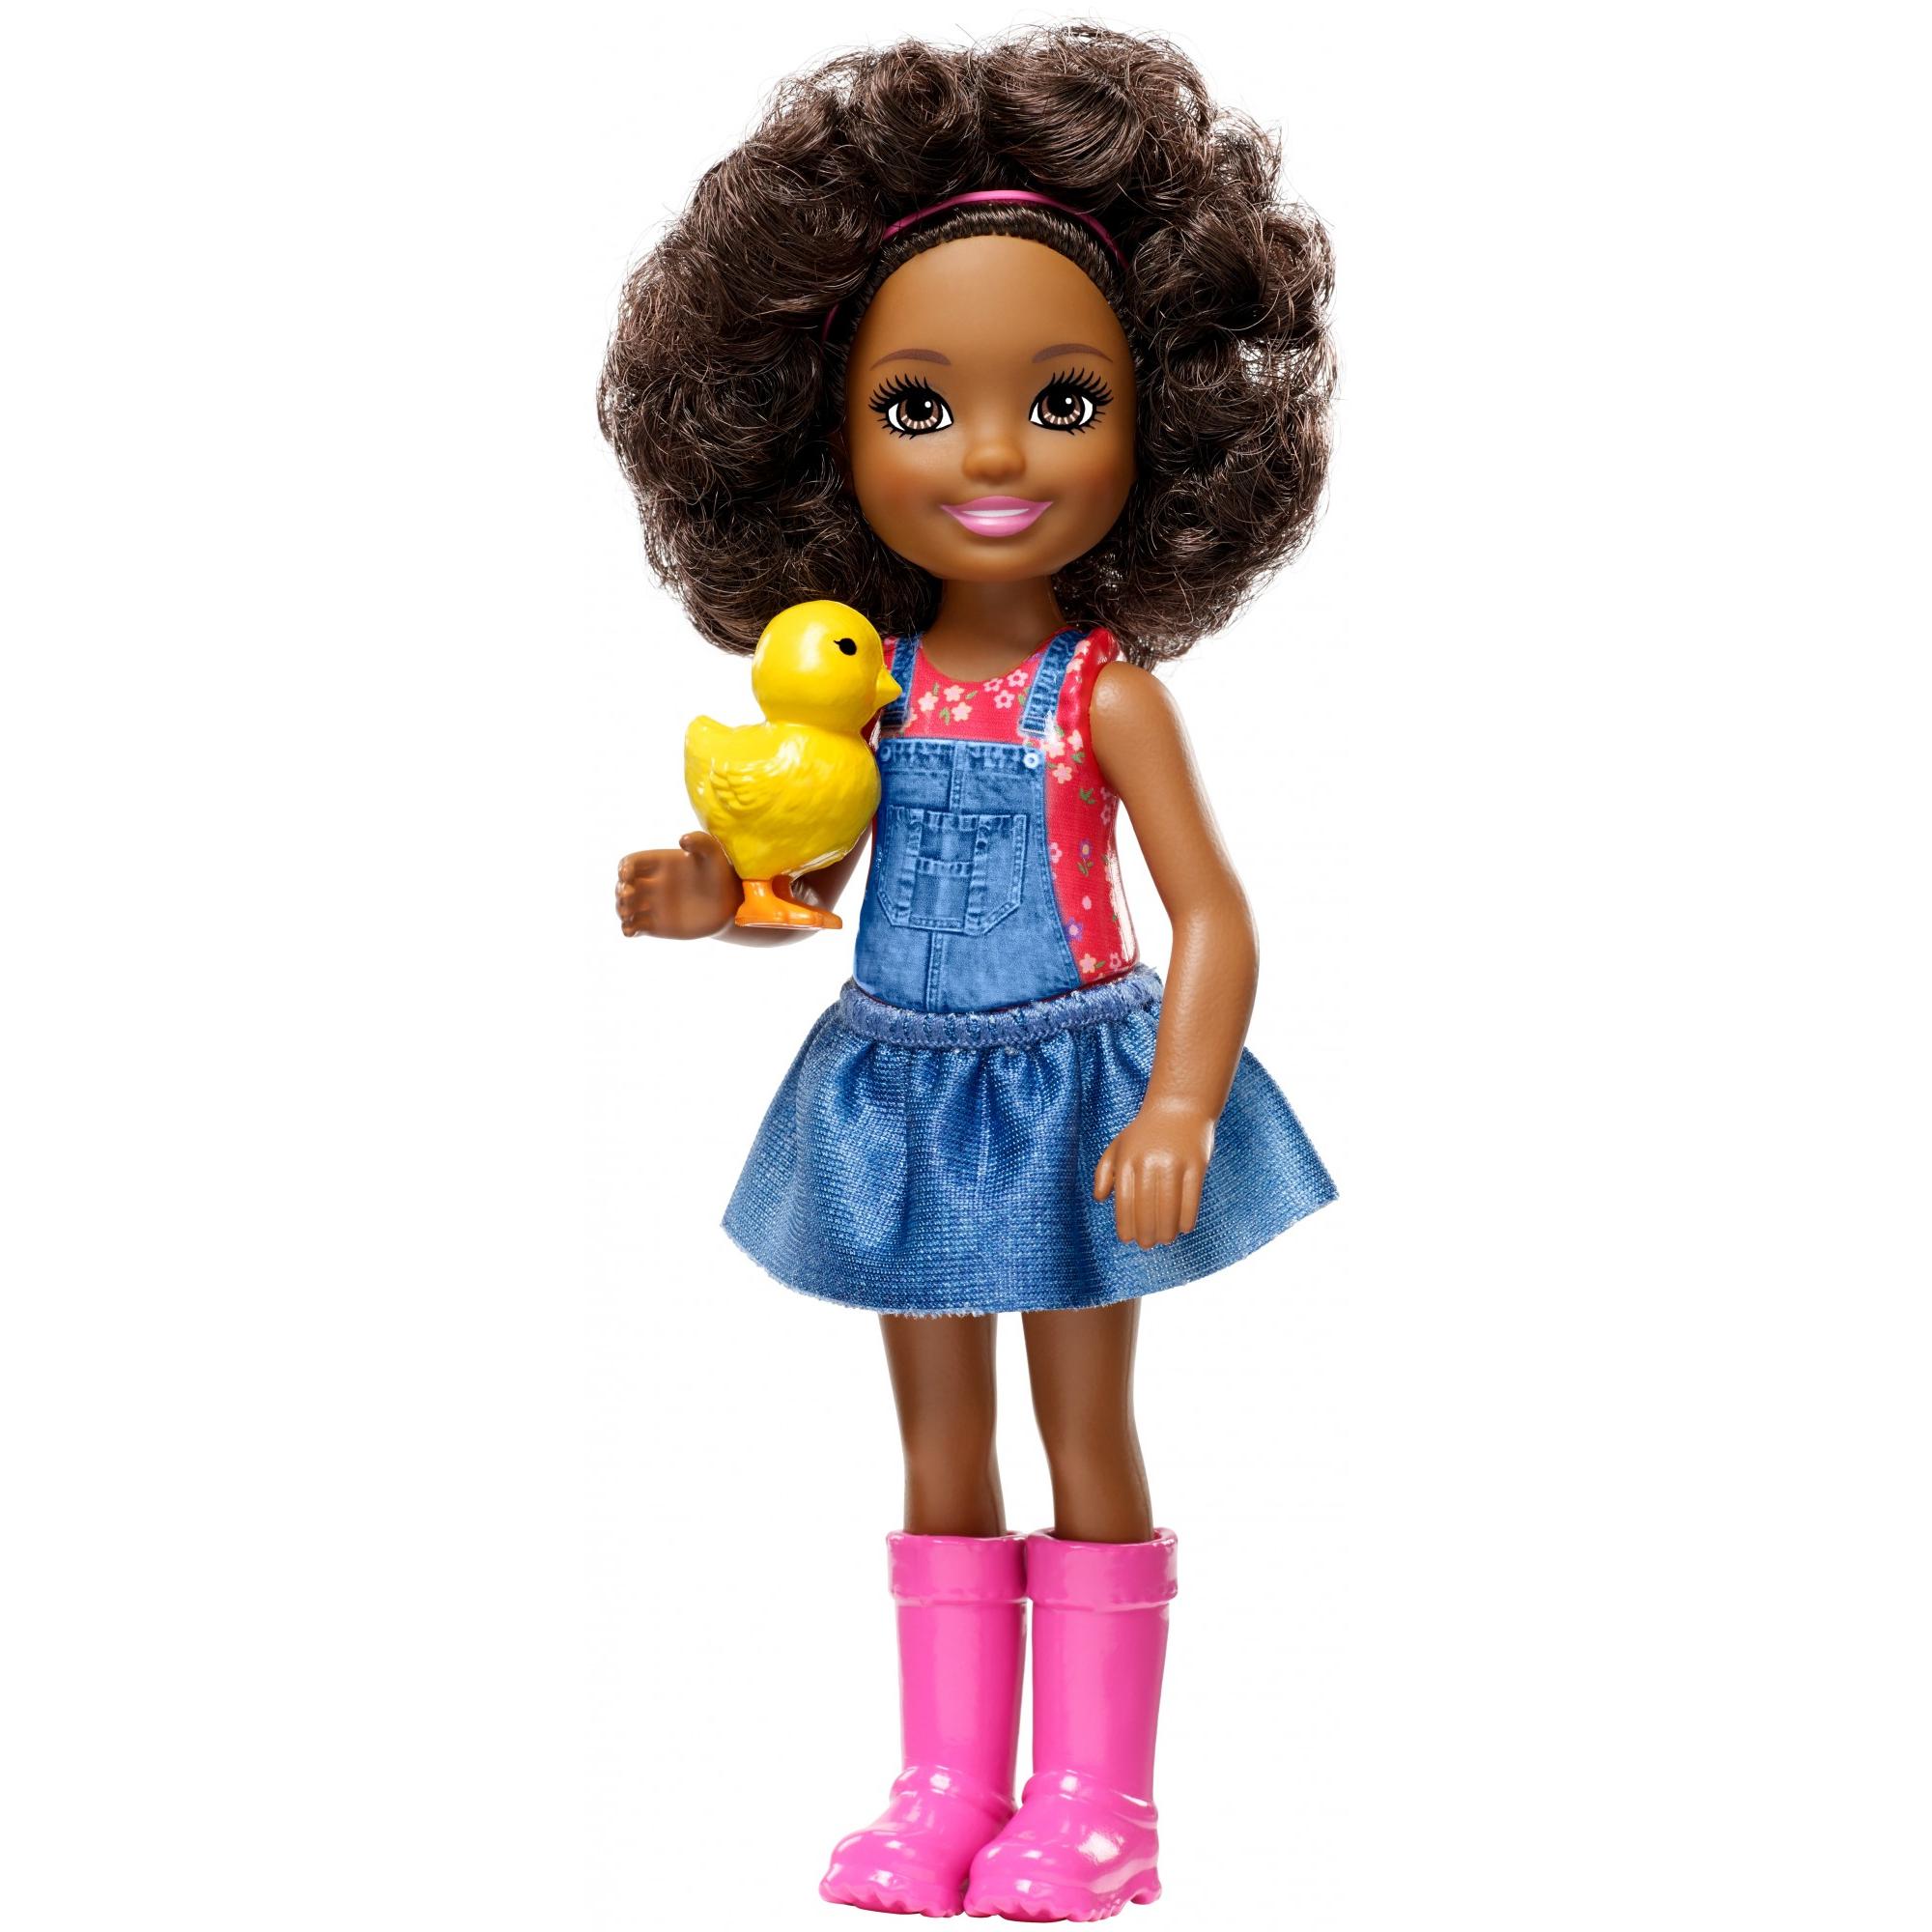 Barbie Sweet Orchard Farm Chelsea Friend Doll with Yellow Chick - image 1 of 6